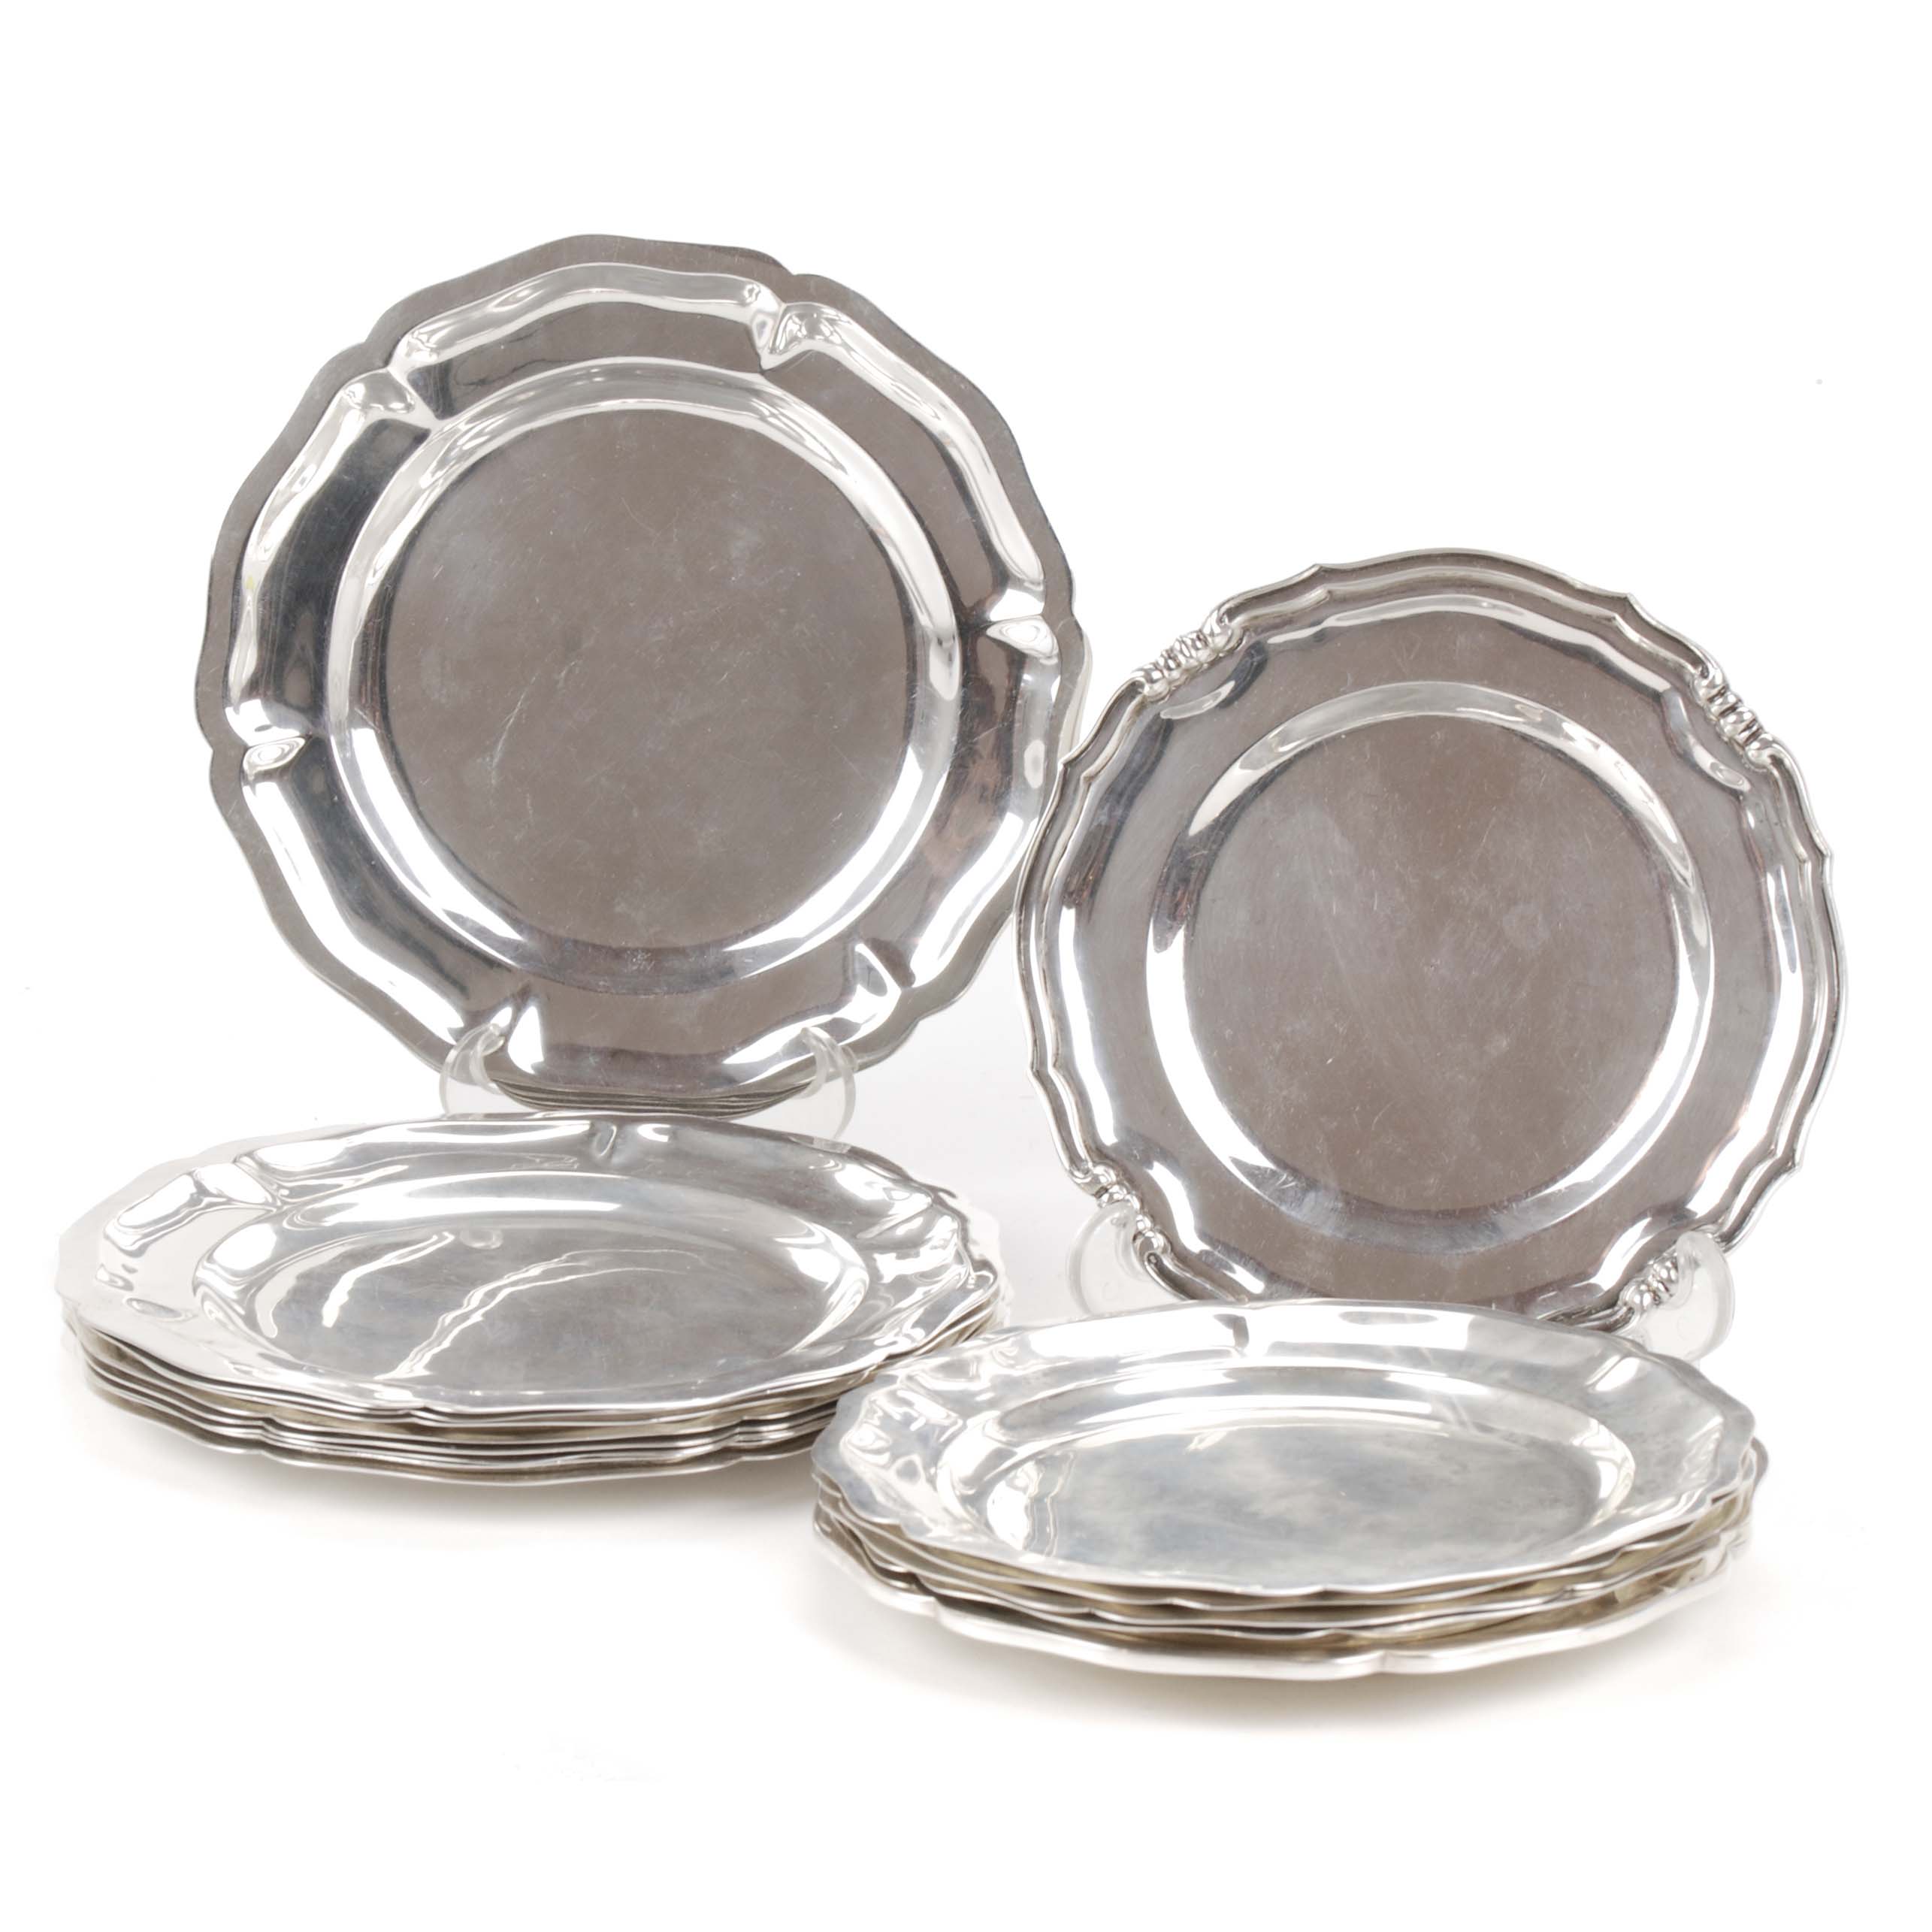 FIFTEEN PLATES, MEXICAN AND AMERICAN SILVER, 20TH CENTURY. 